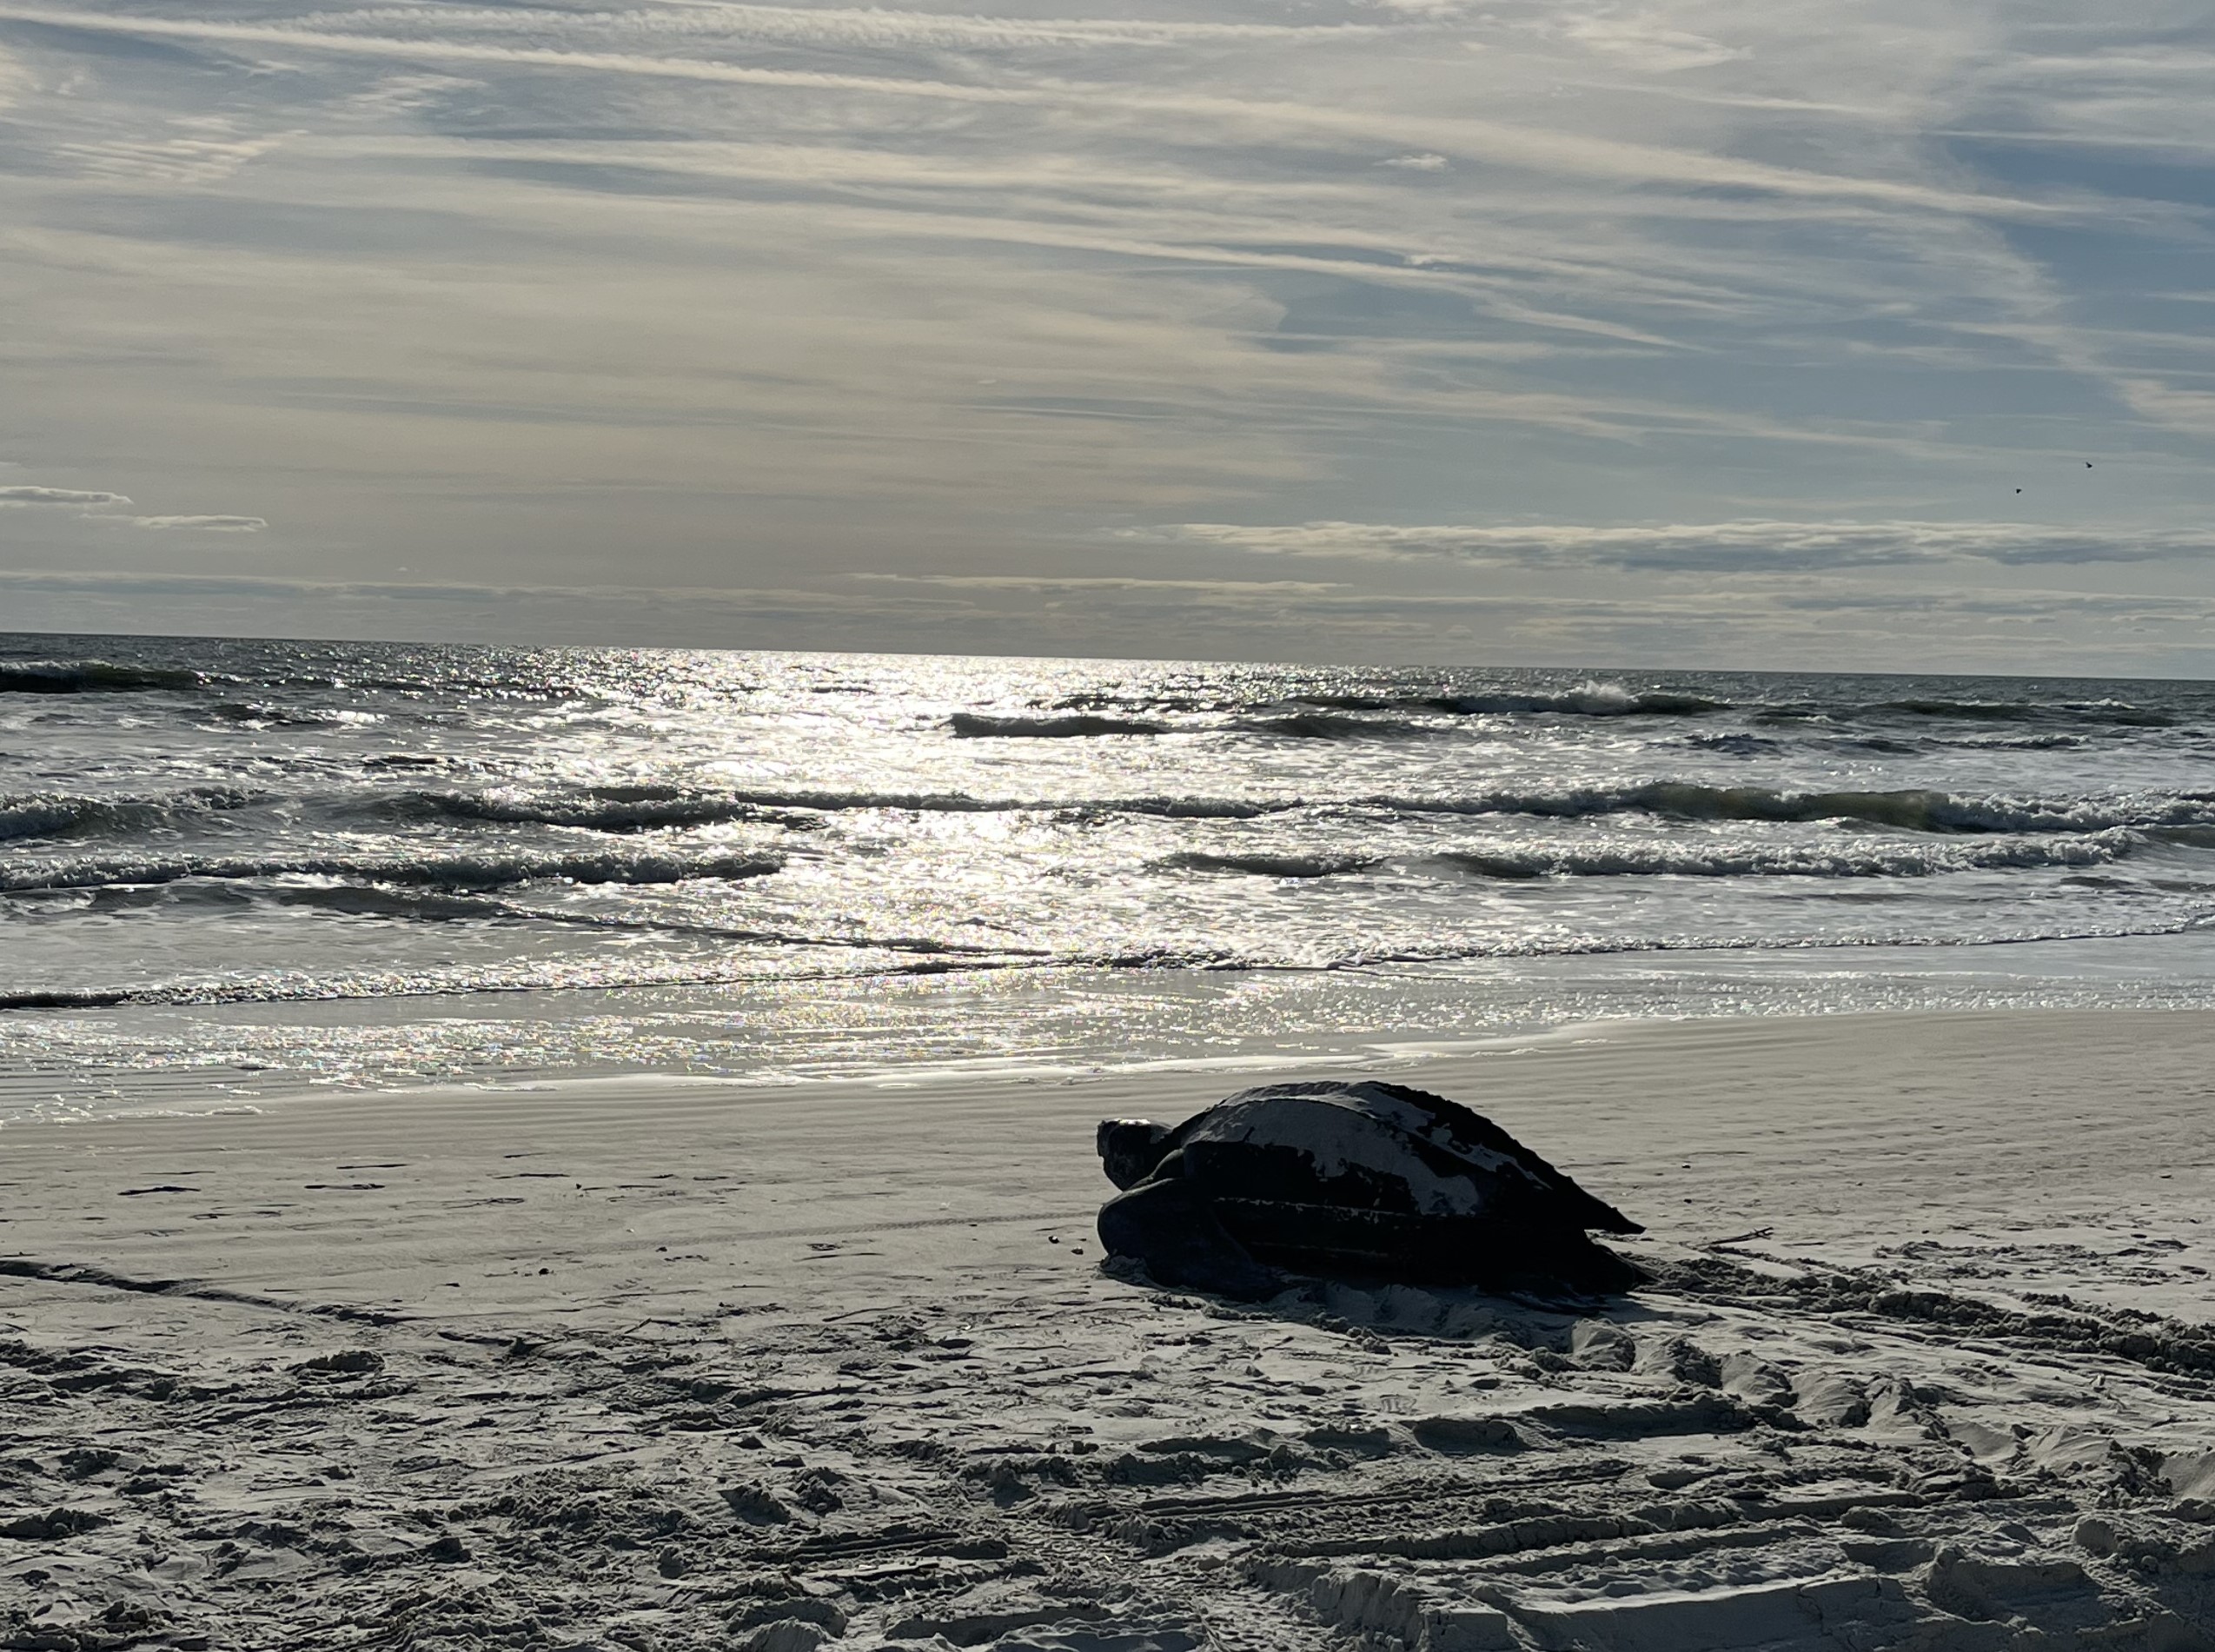 Leatherback turtle on a beach, looking toward the water.